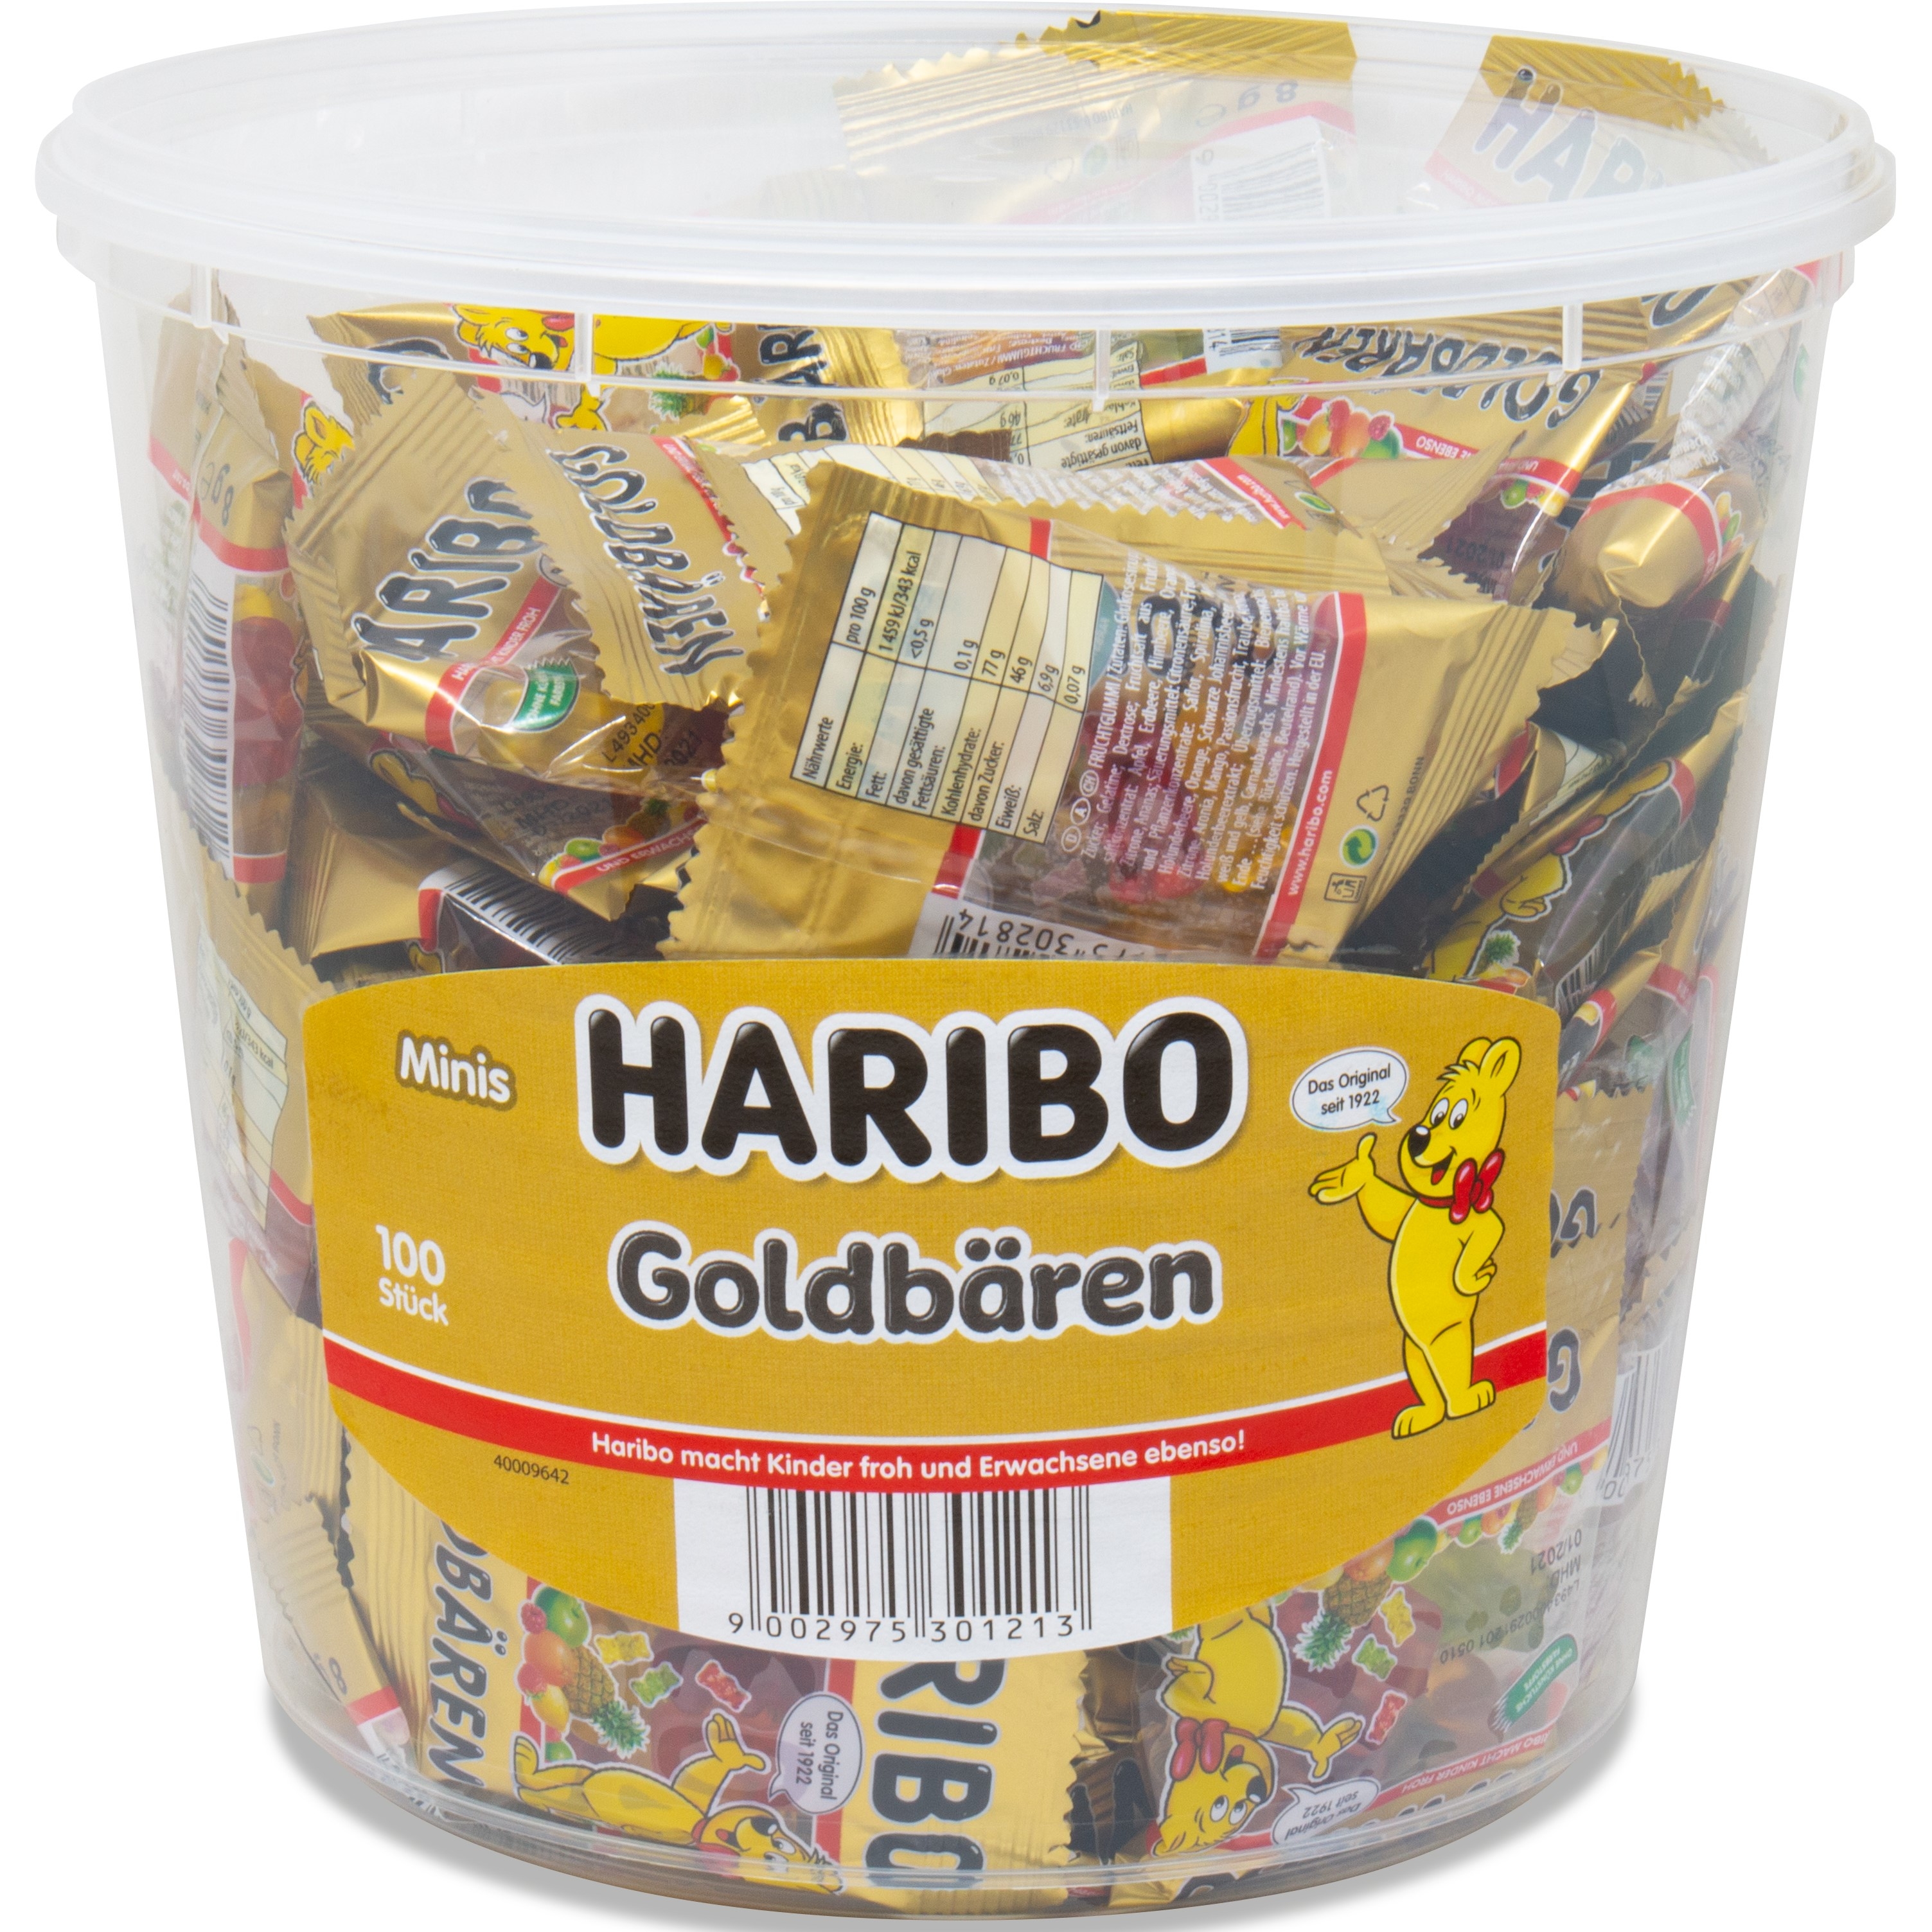 HARIBO Ours d'or 5828 100 pcs.